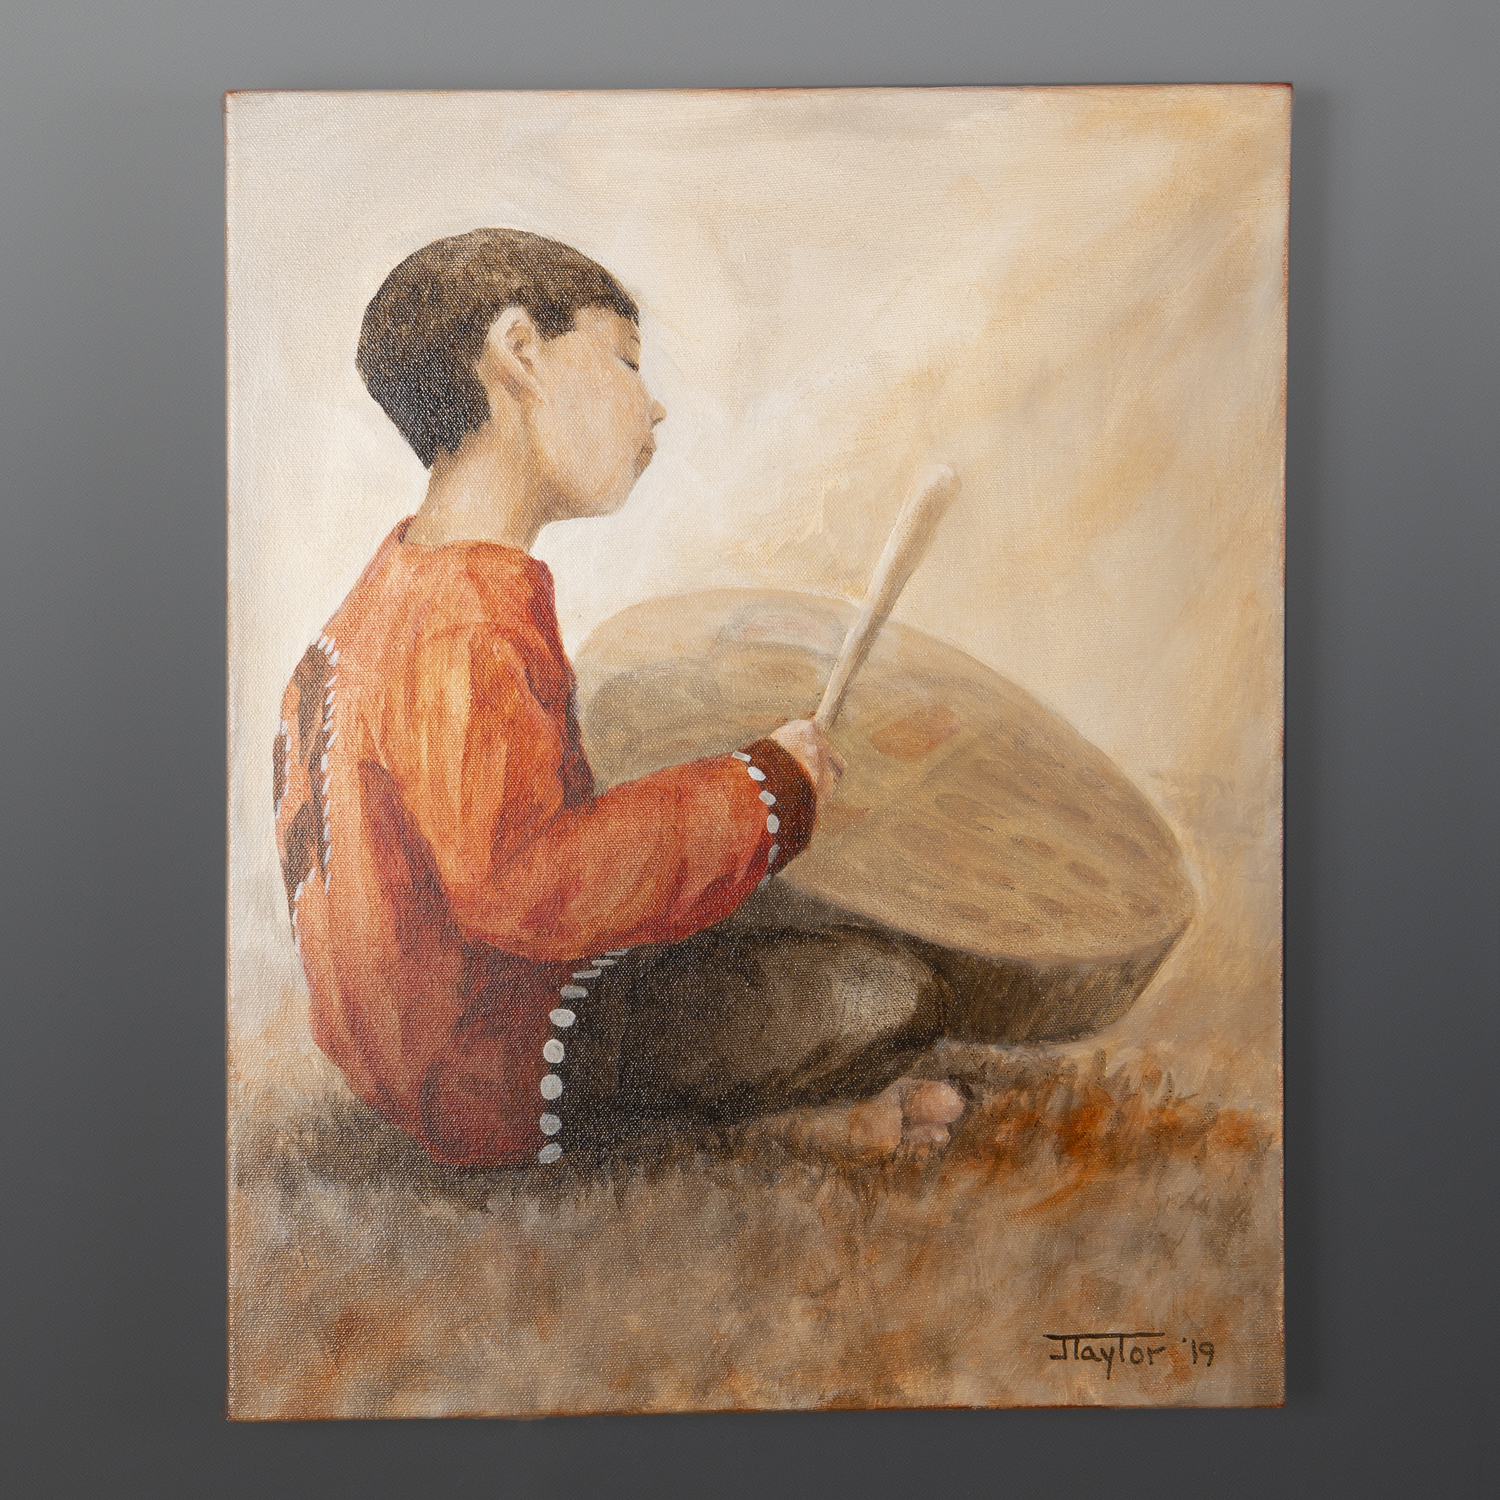 In His Own World Drummer Boy Jean Taylor Tlingit contemporary painting